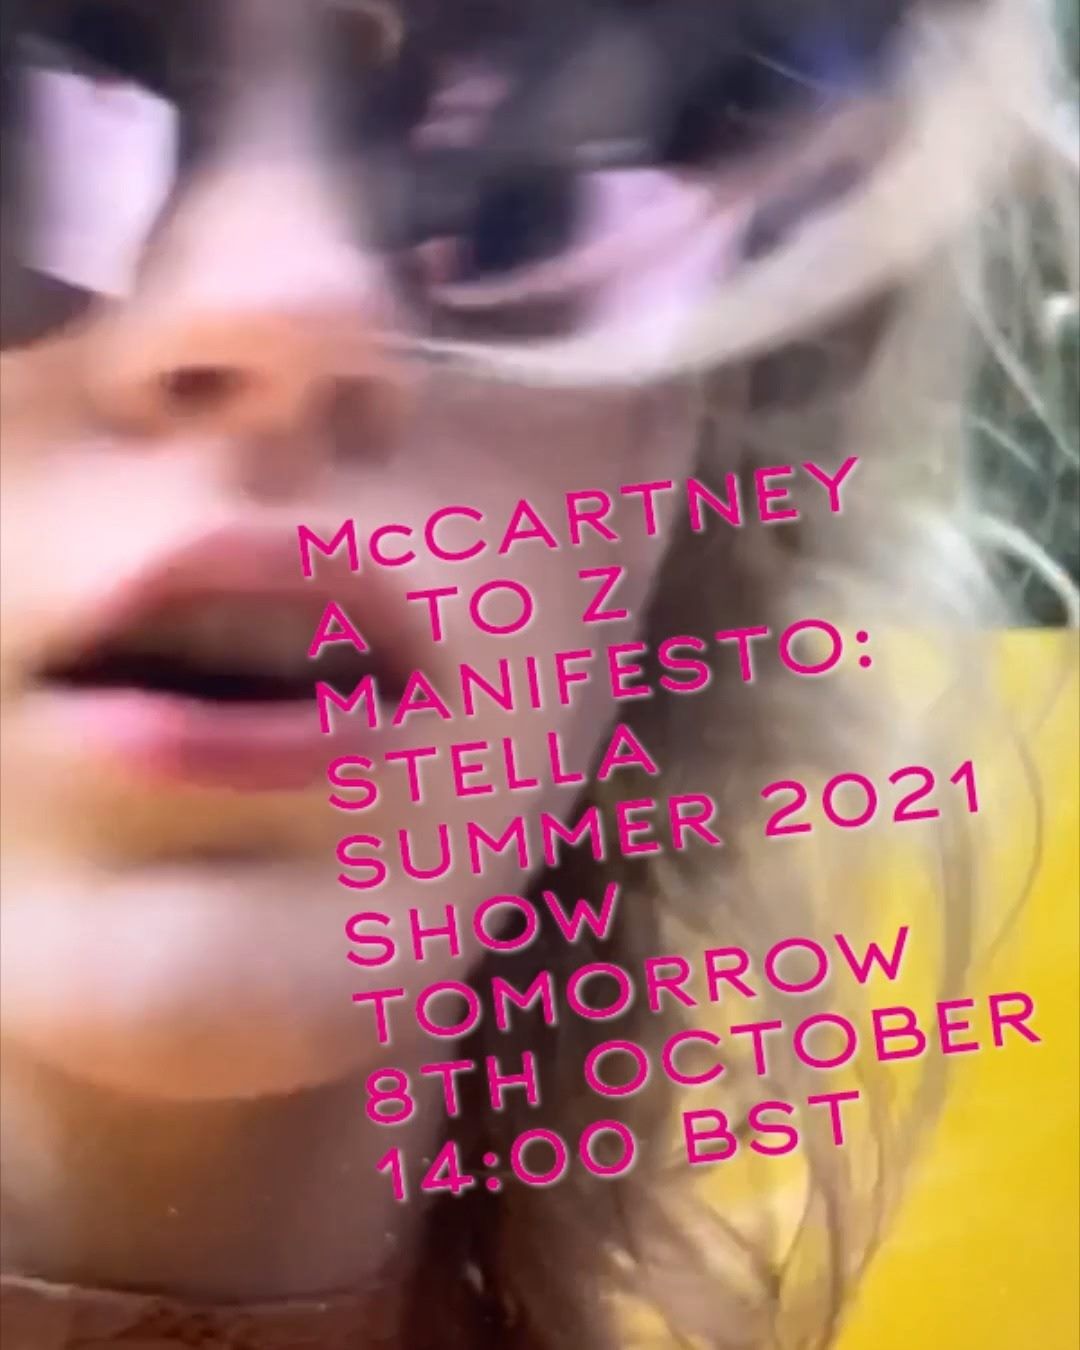 Stella McCartney - Through our #StellaAtoZ, we questioned how and why we do everything – and created #StellaSummer21. Join our McCartney A to Z Manifesto: Summer 2021 Show tomorrow at 14:00 BST here o...